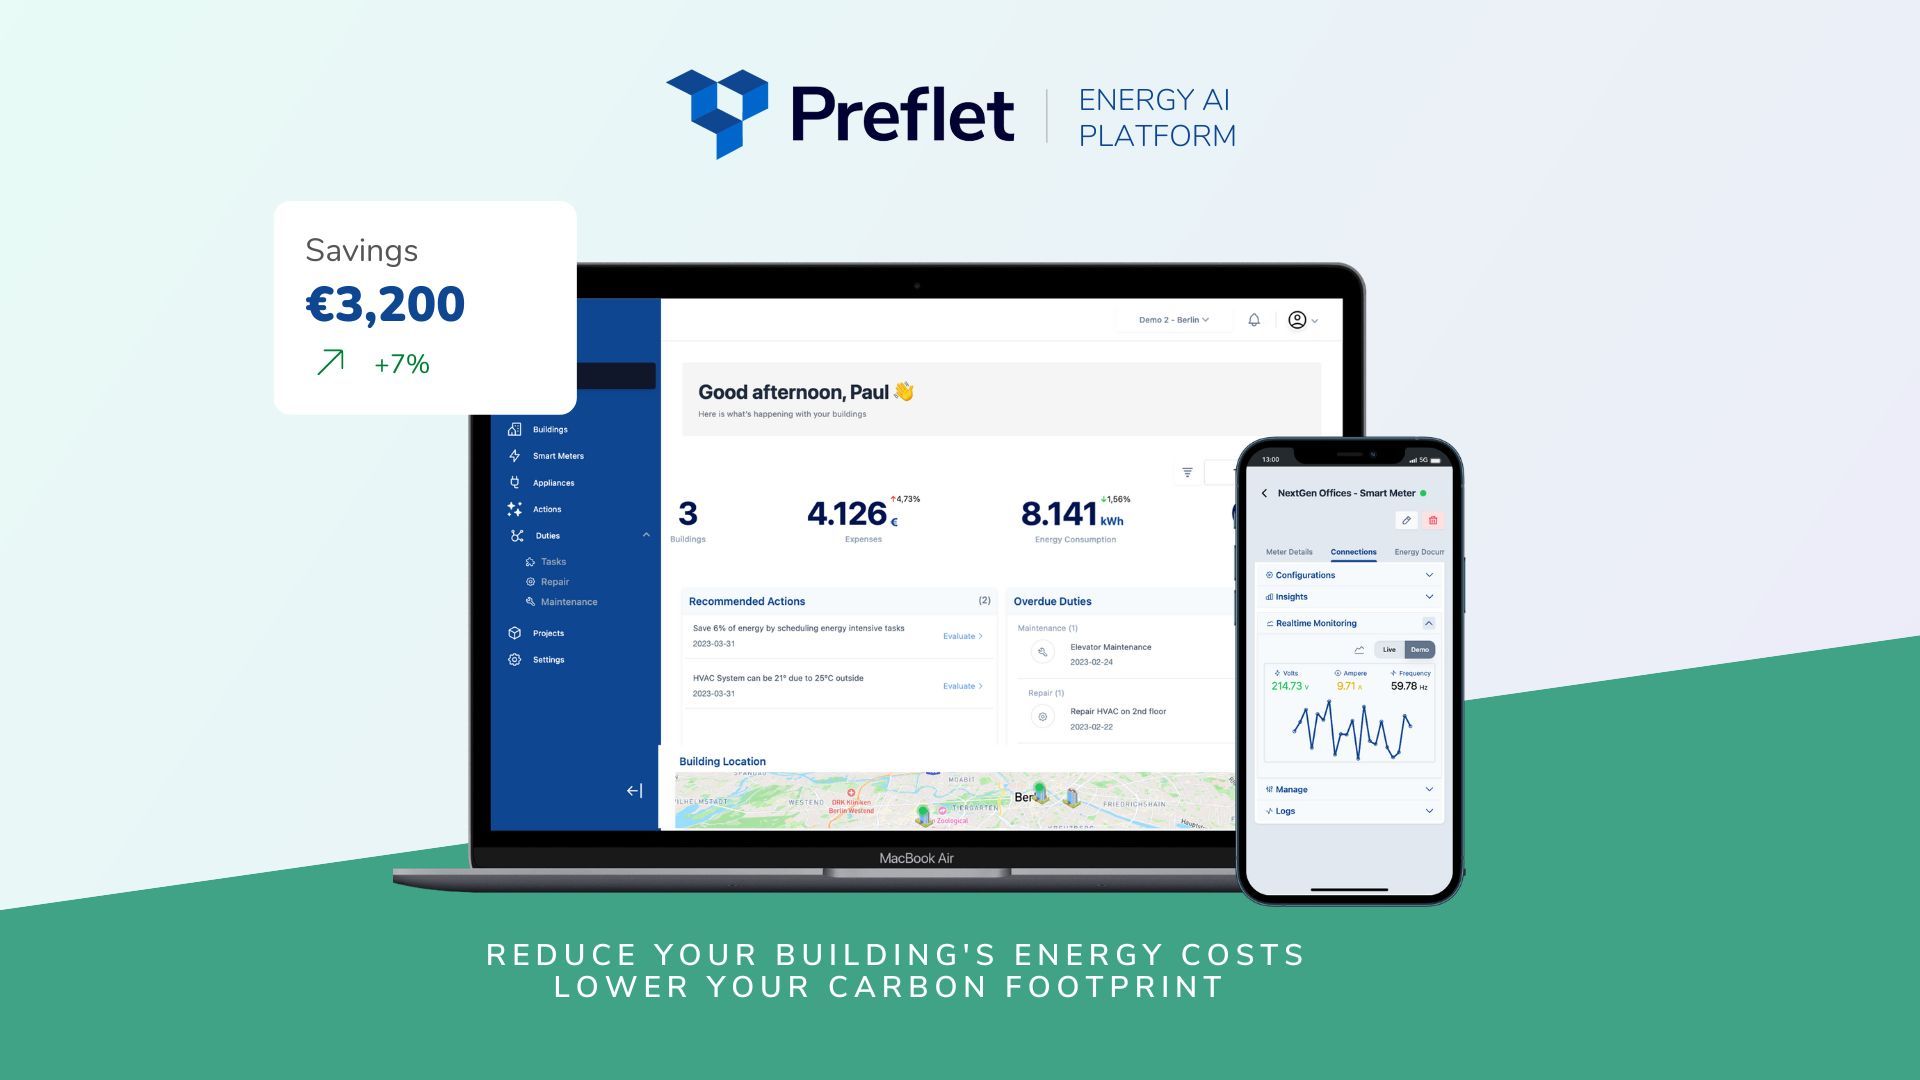 New Energy AI Platform enables significant energy savings & emissions reductions